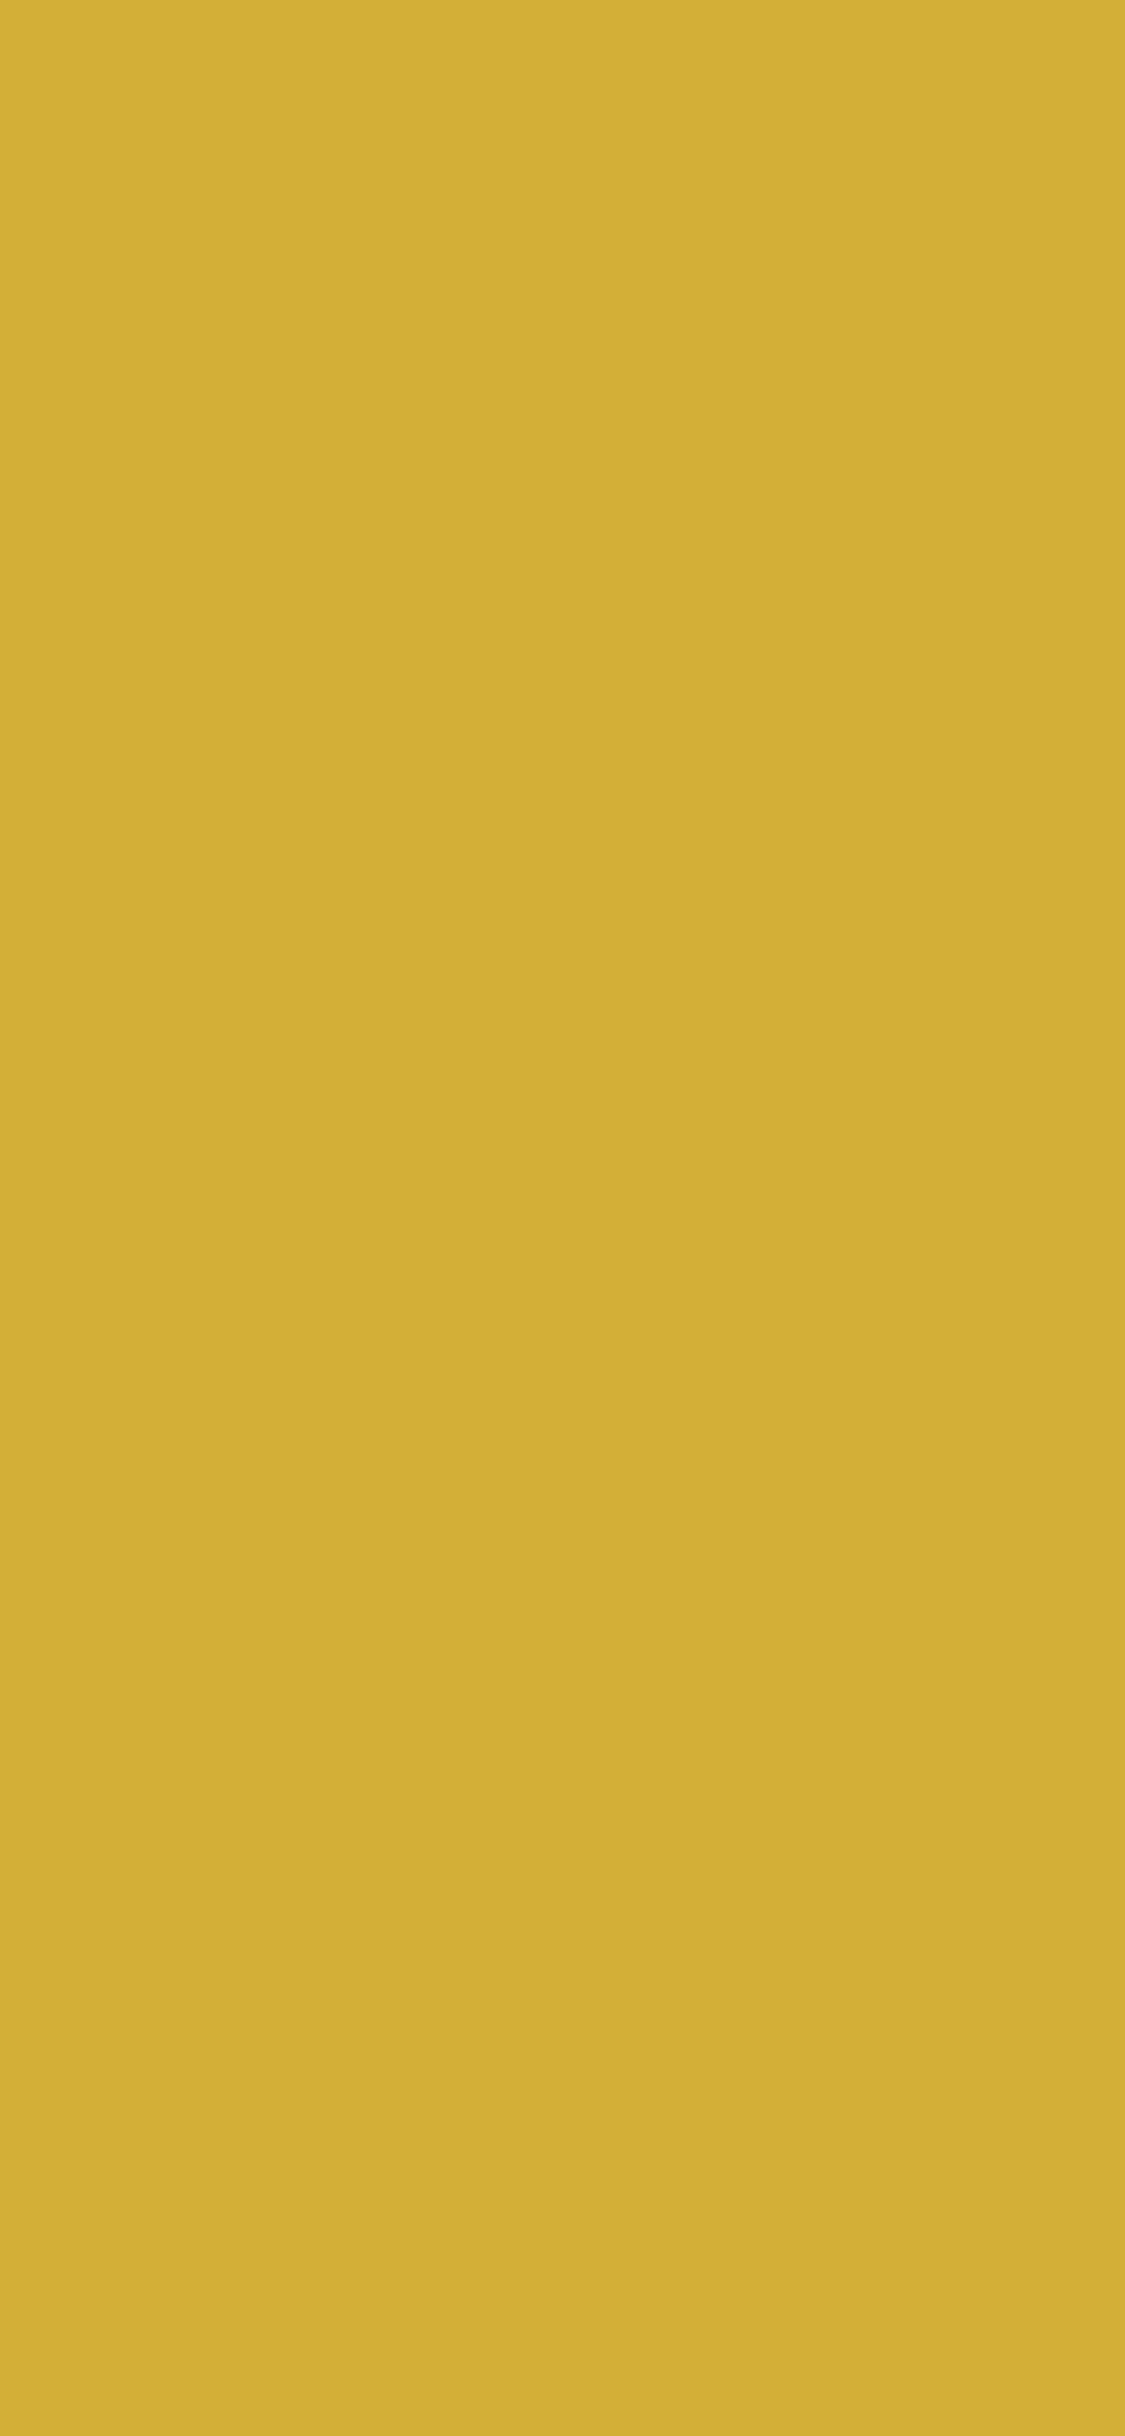 1125x2436 Gold Metallic Solid Color Background